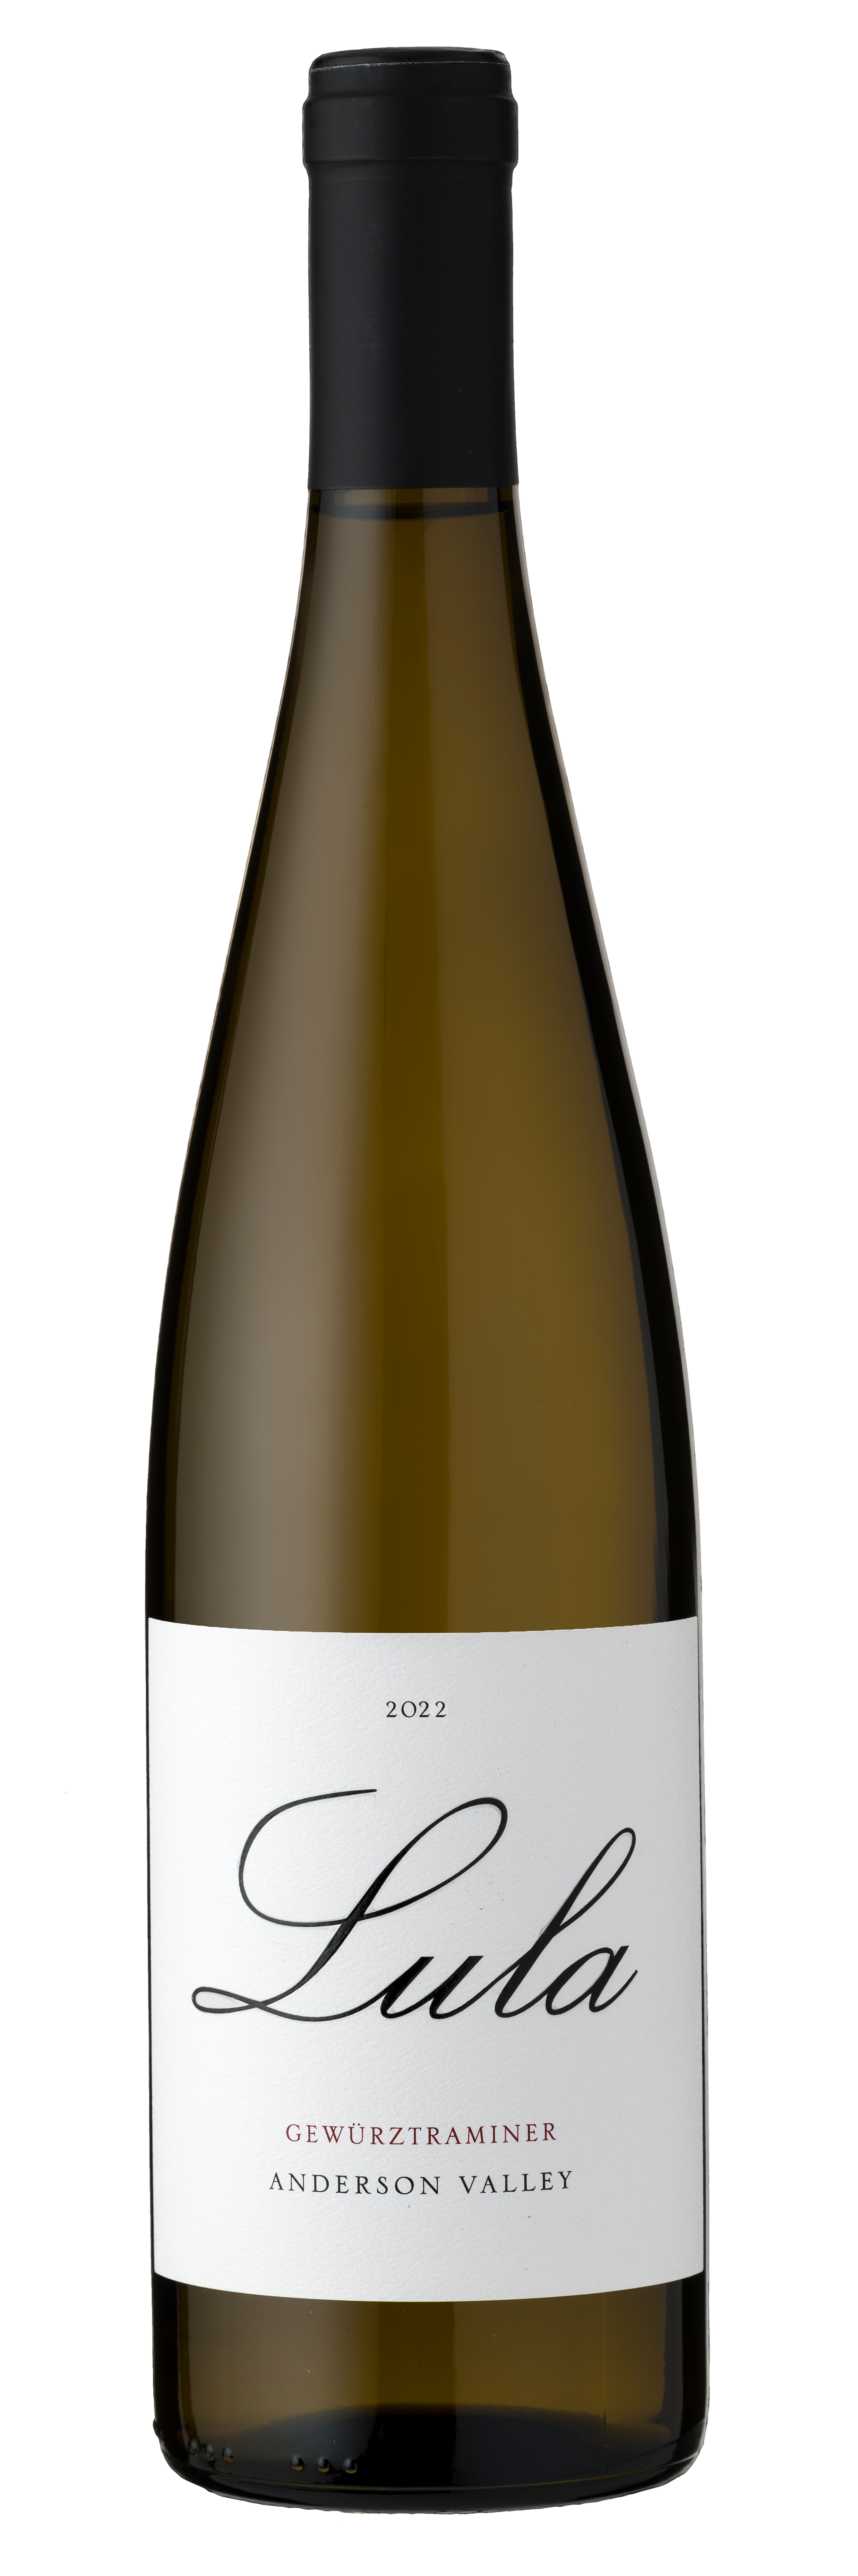 Product Image for 2022 Gewurztraminer